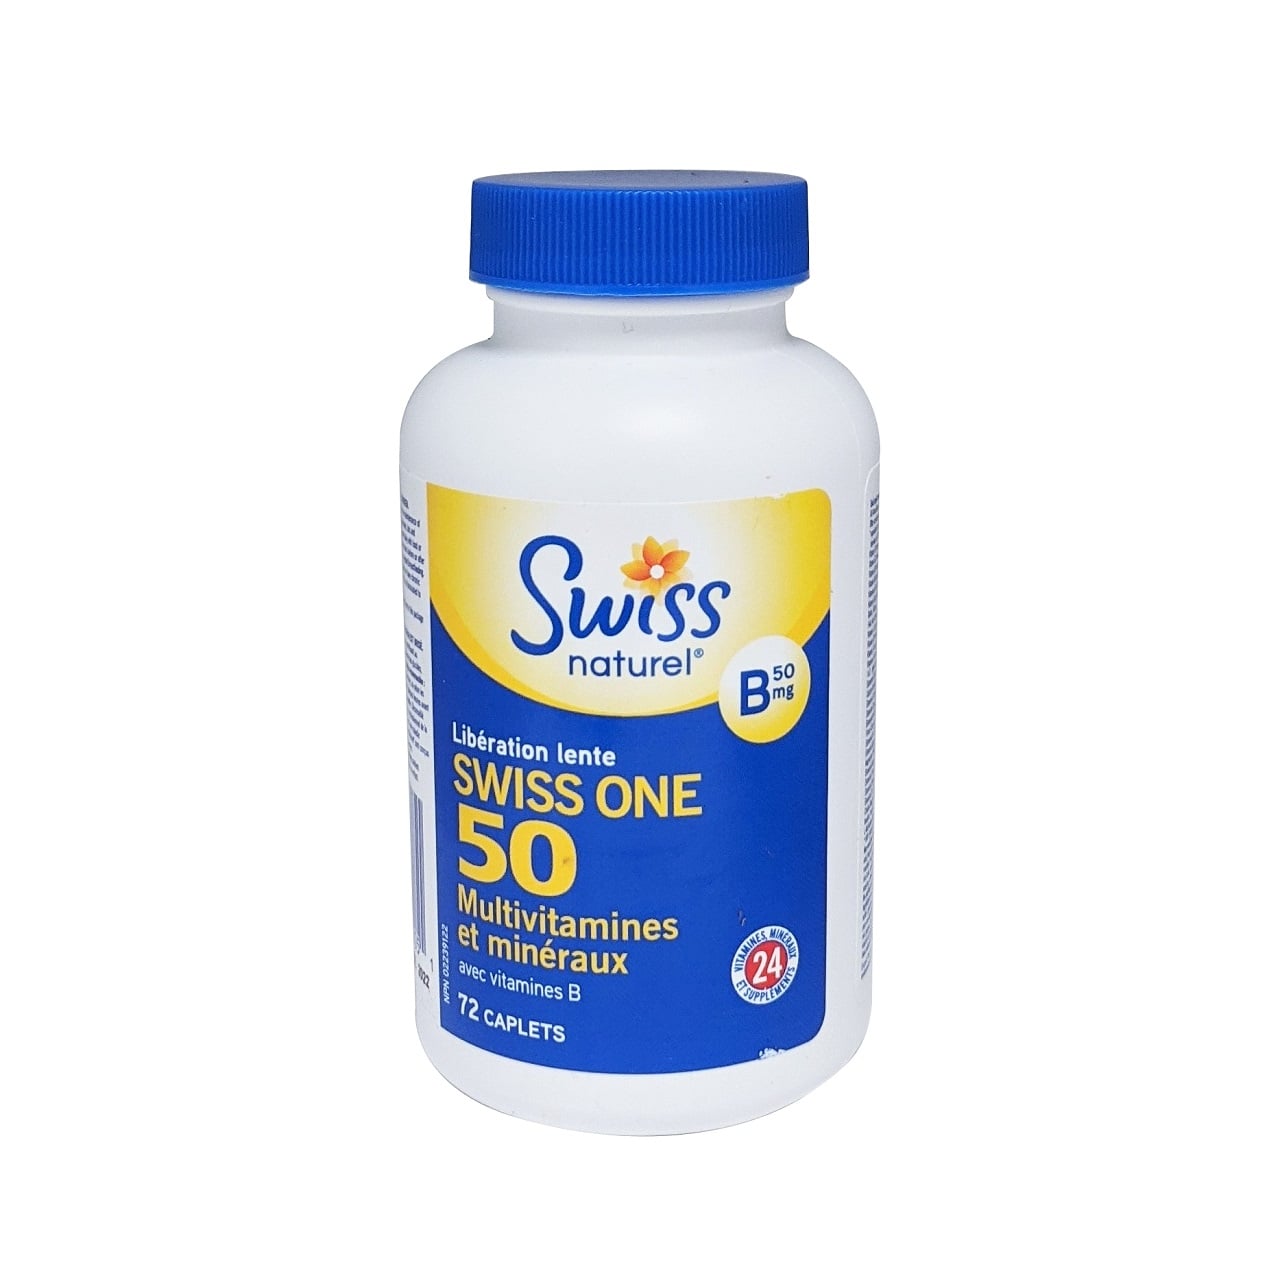 Product label for Swiss Natural B50 Multi Vitamin & Mineral Timed Release (72 caplets) in French